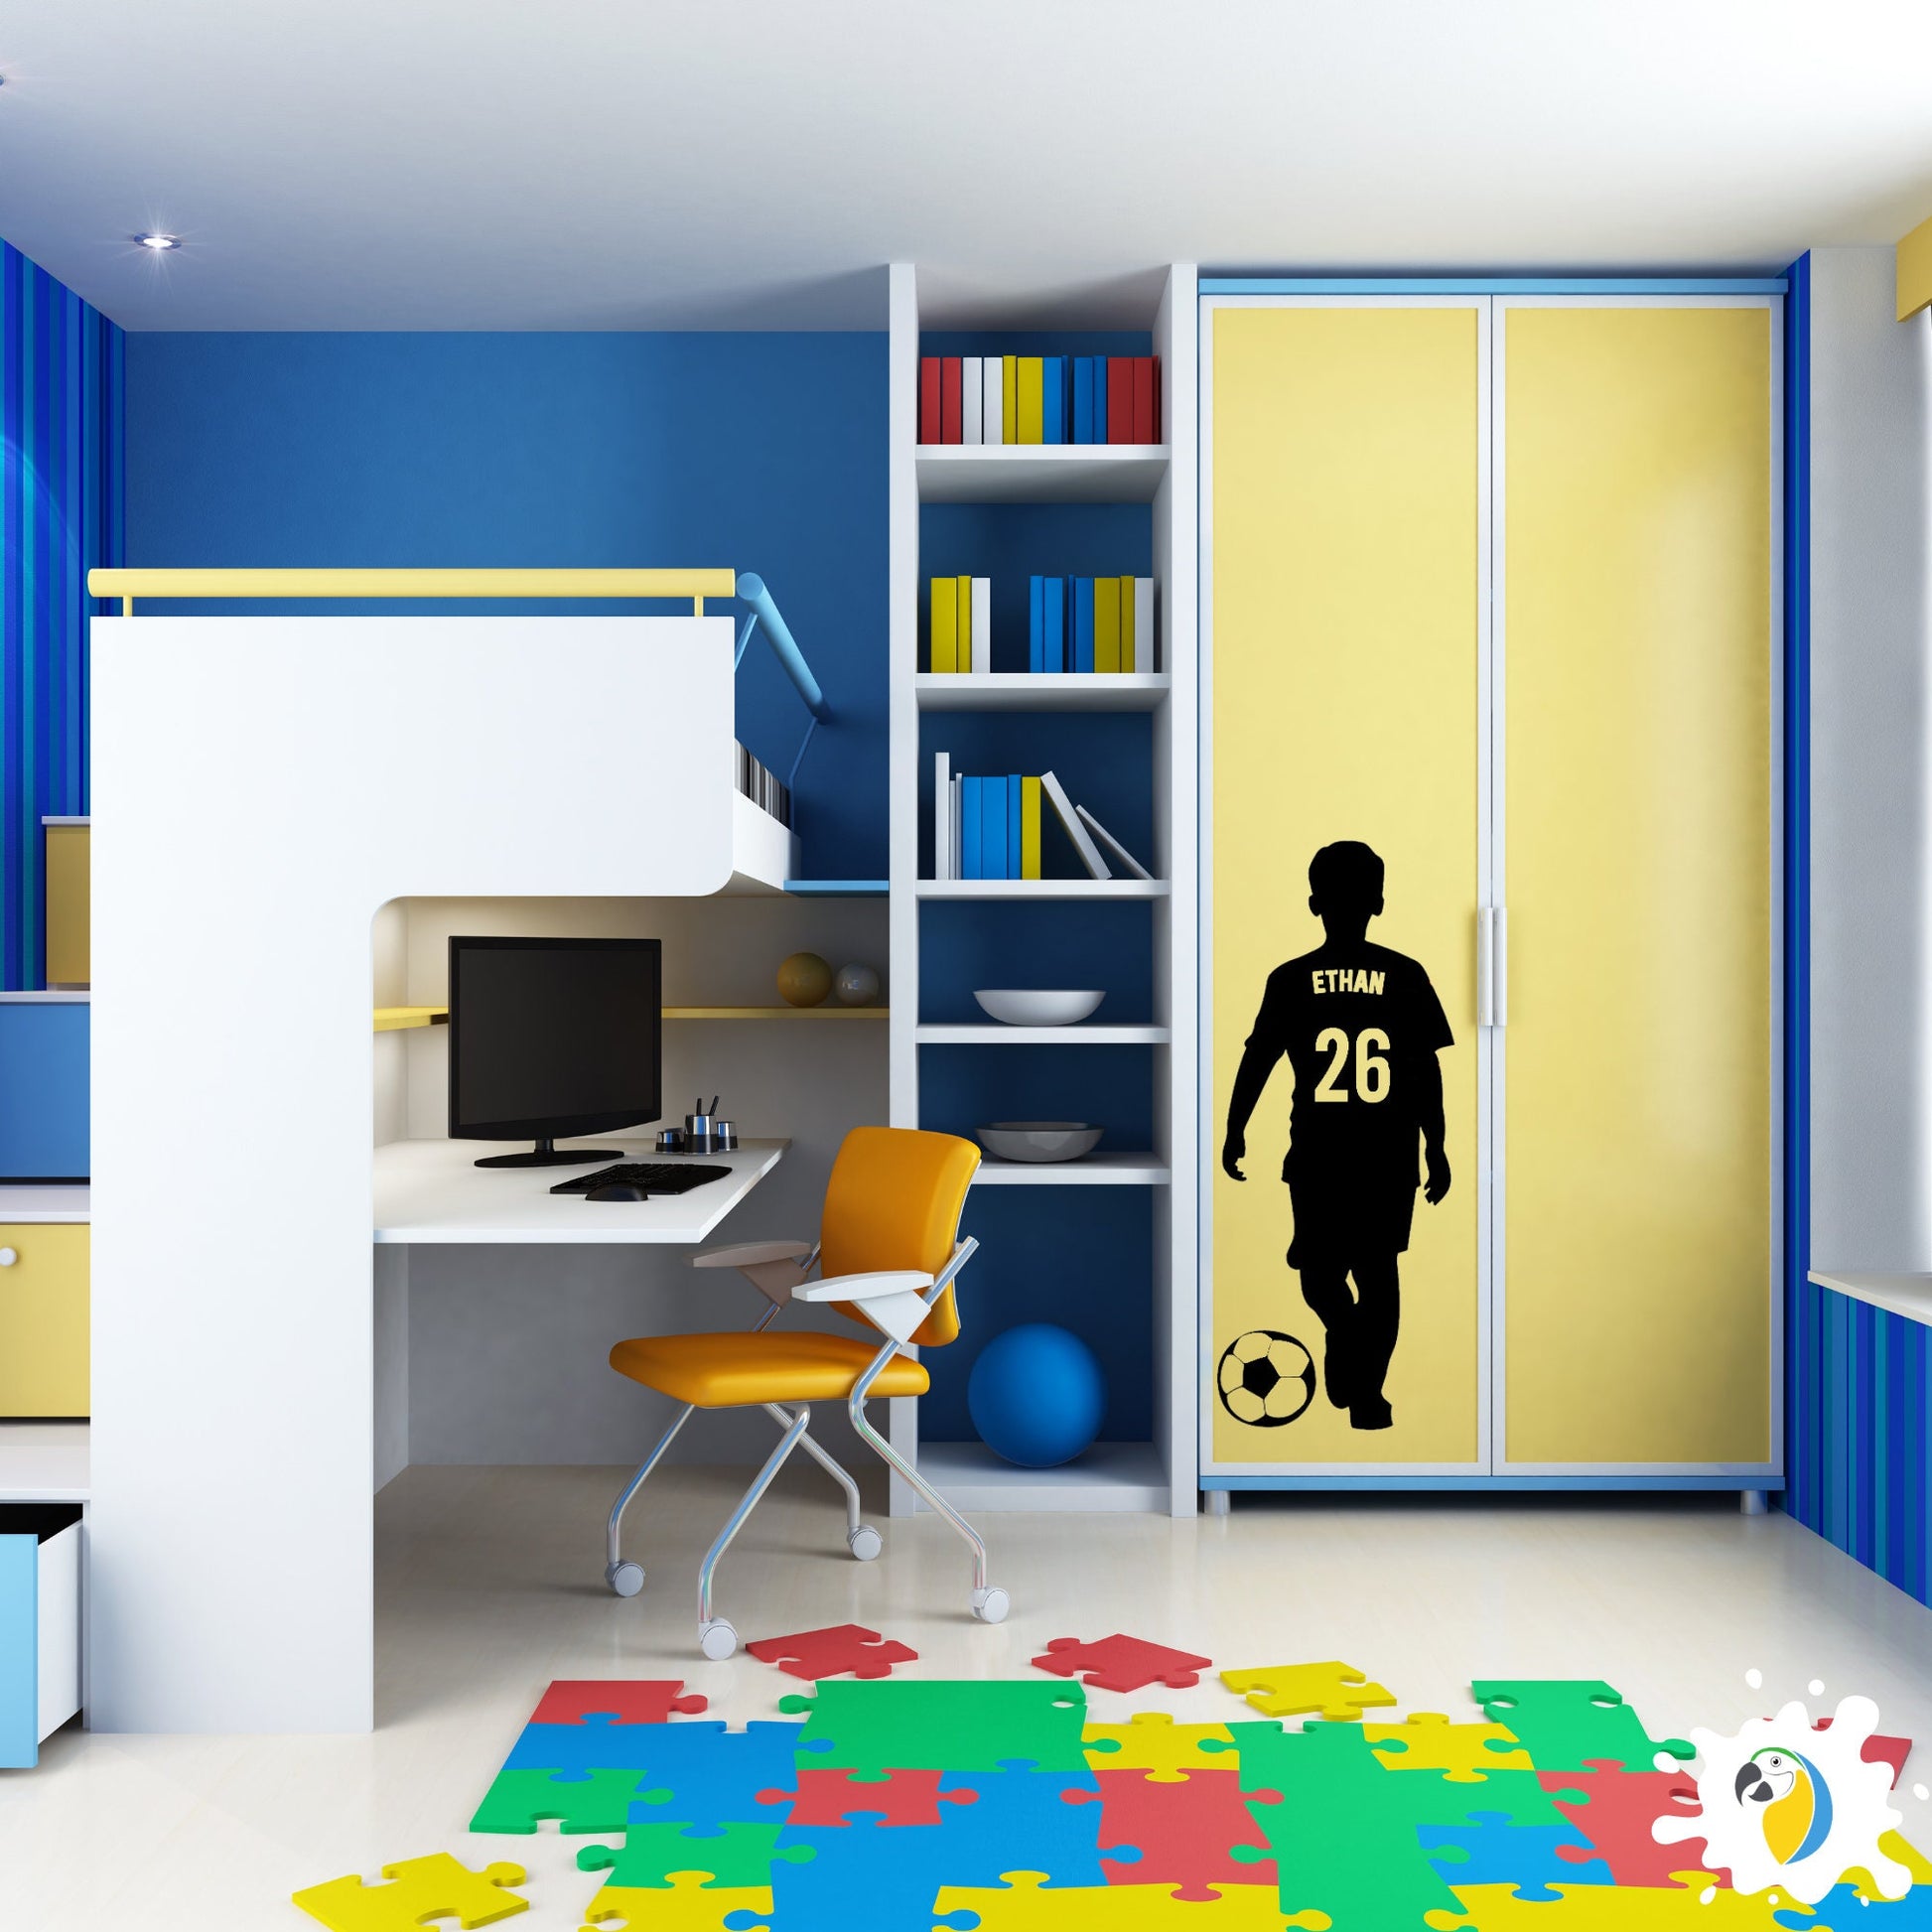 Custom Name and Number Soccer Player Wall Decal | DIY Home Decor For Boys Room | Personalized Sport Football Vinyl Sticker Poster | Papagaio Studio Etsy Shop